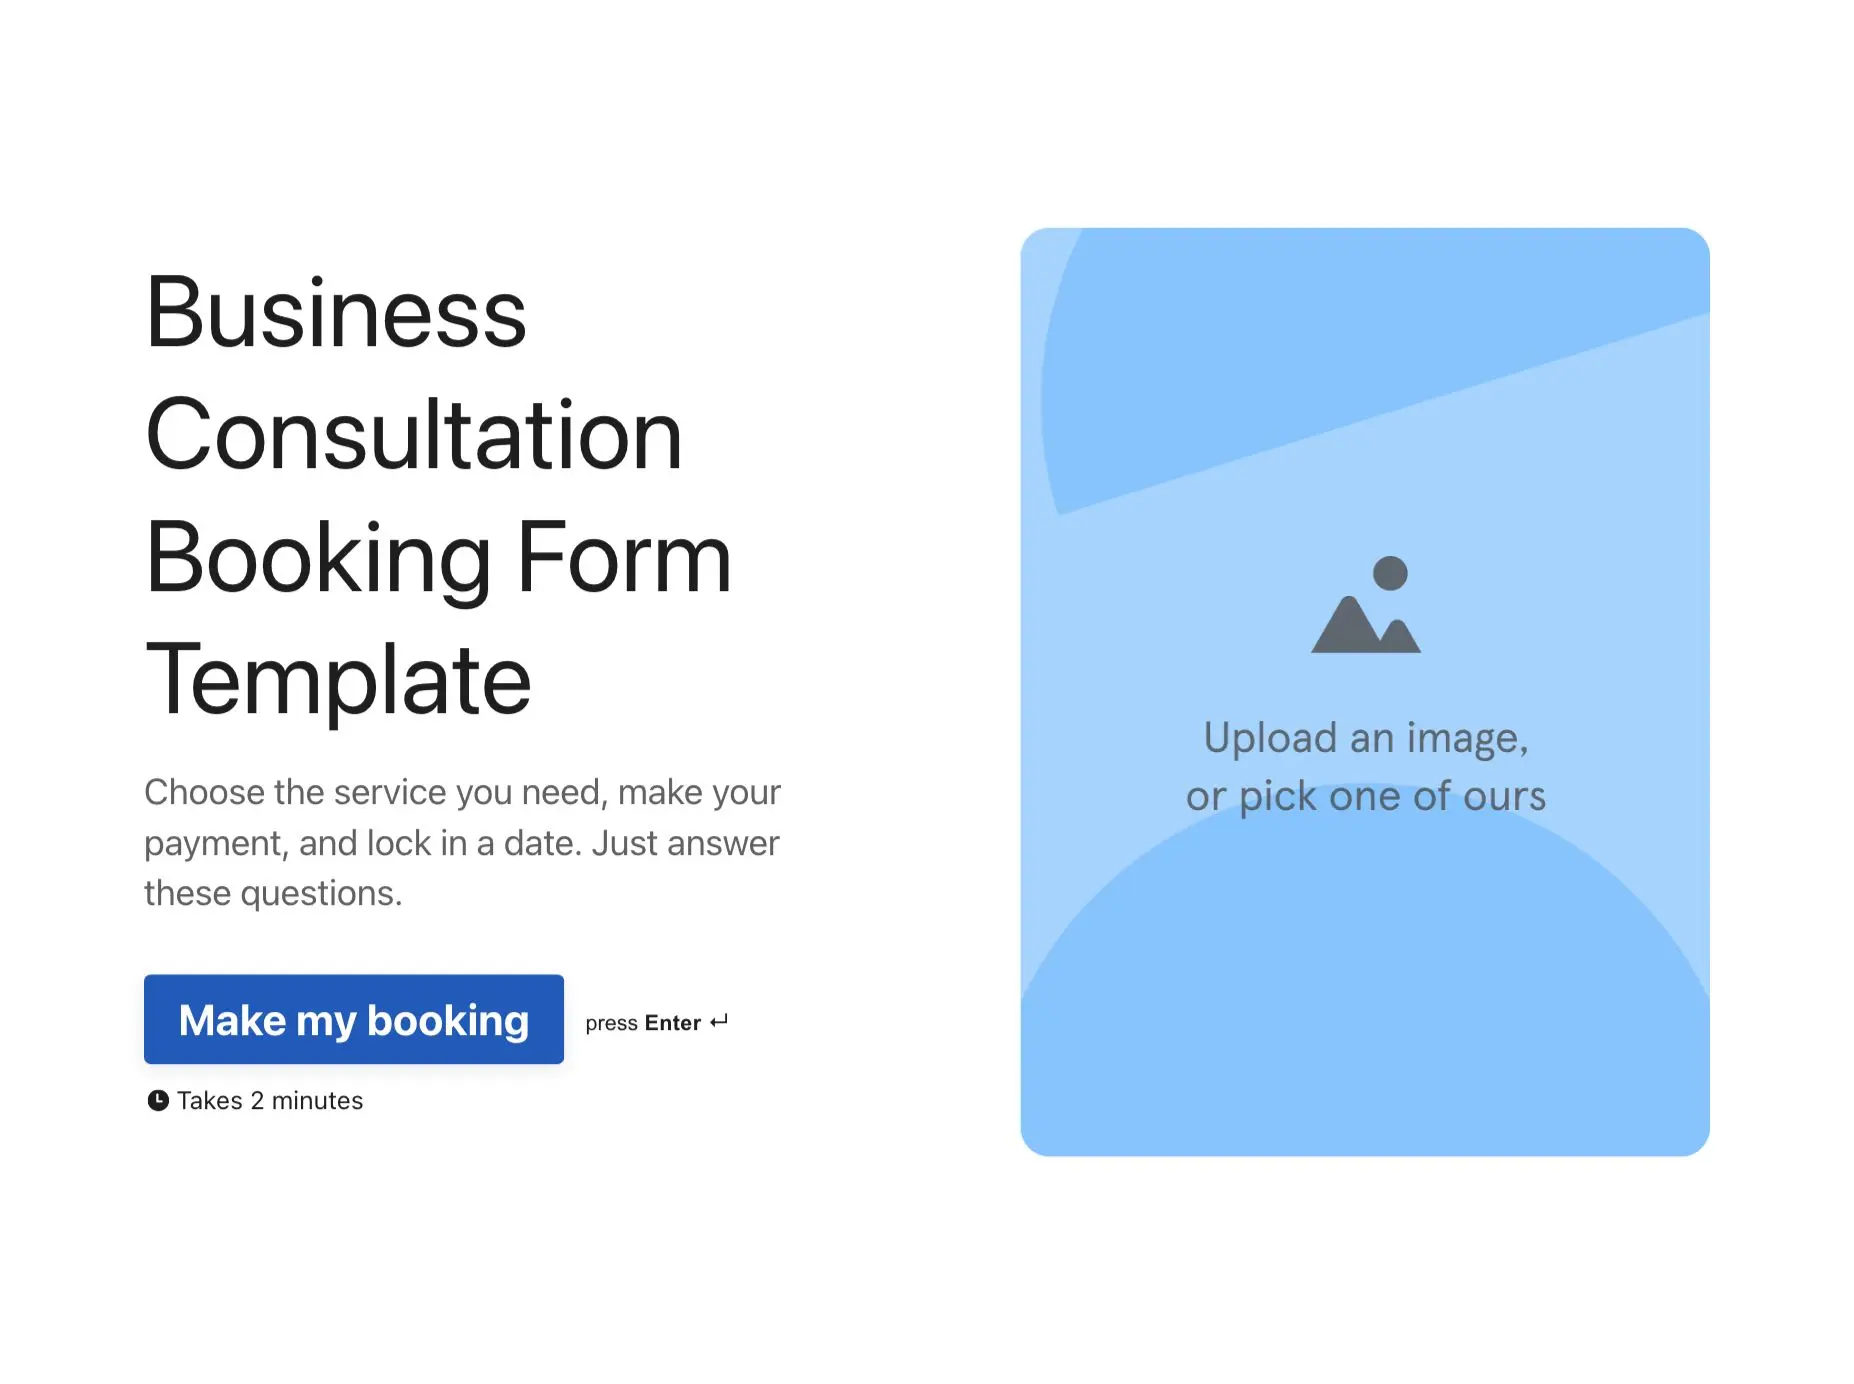 Business Consultation Booking Form Template Hero